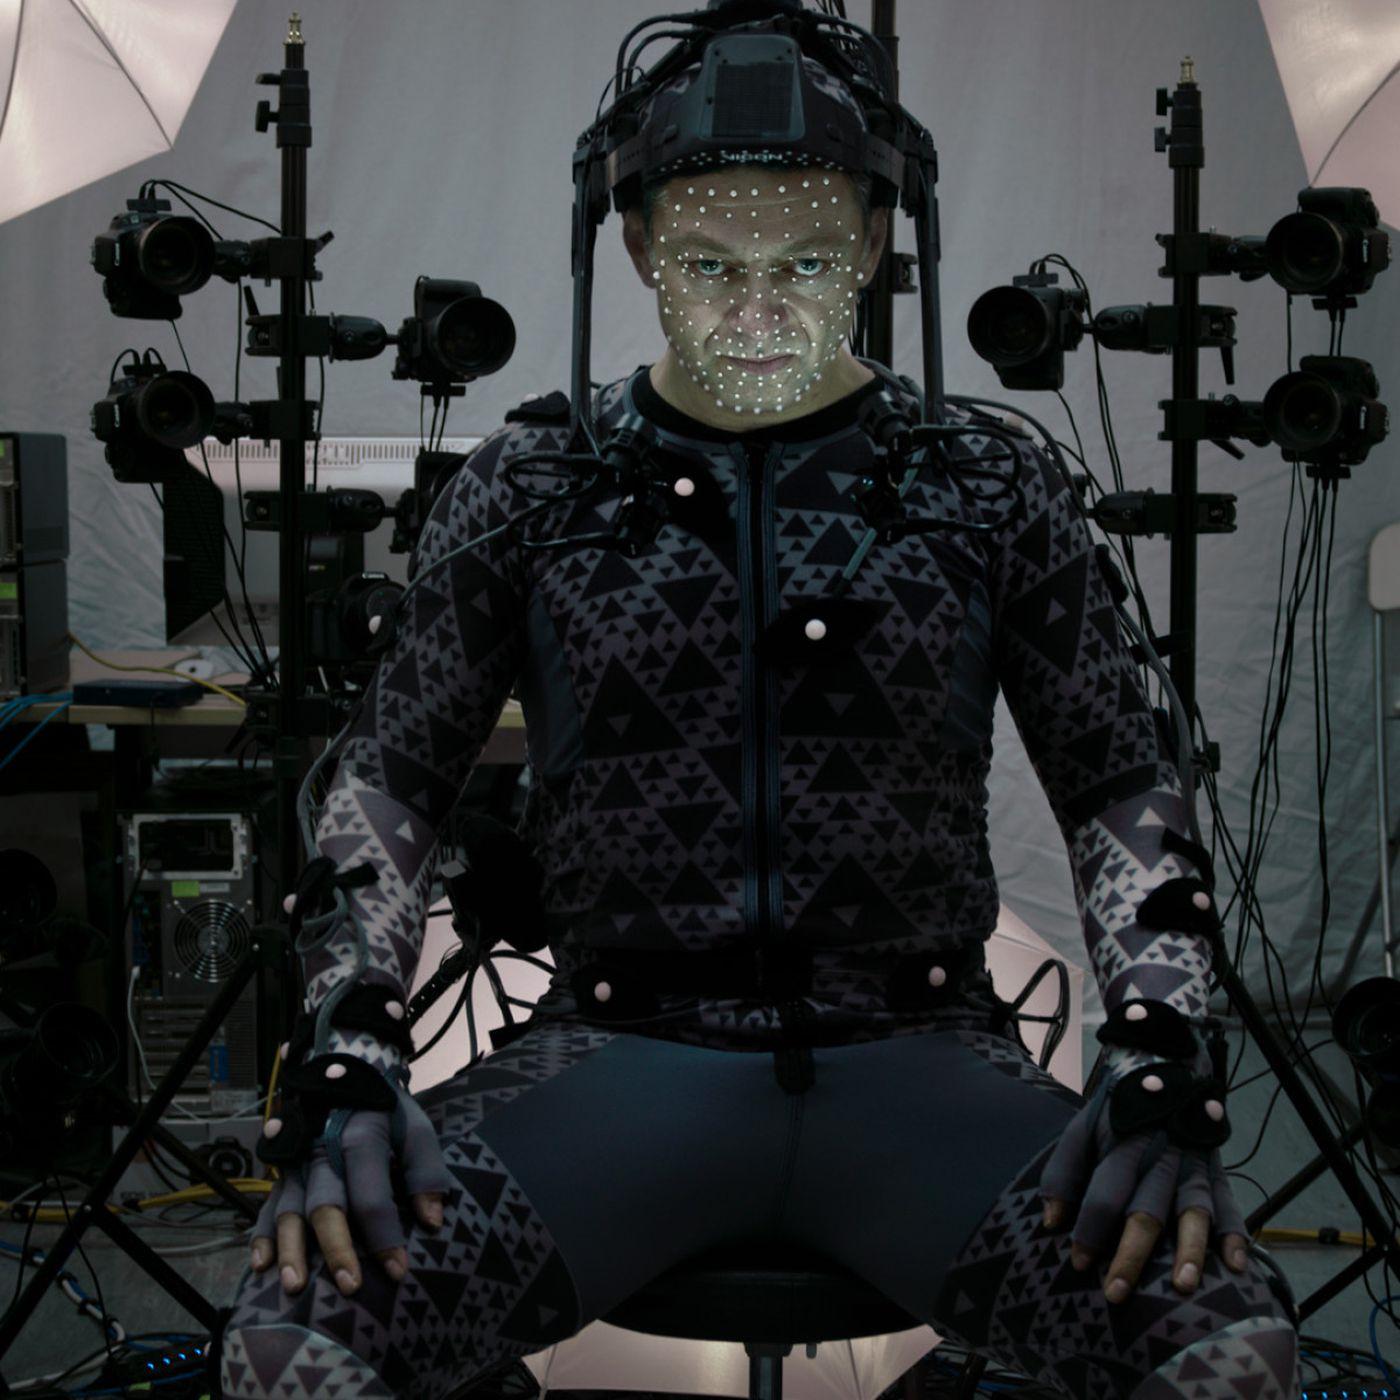 Andy Serkis' Star Wars: The Force Awakens character revealed, and he